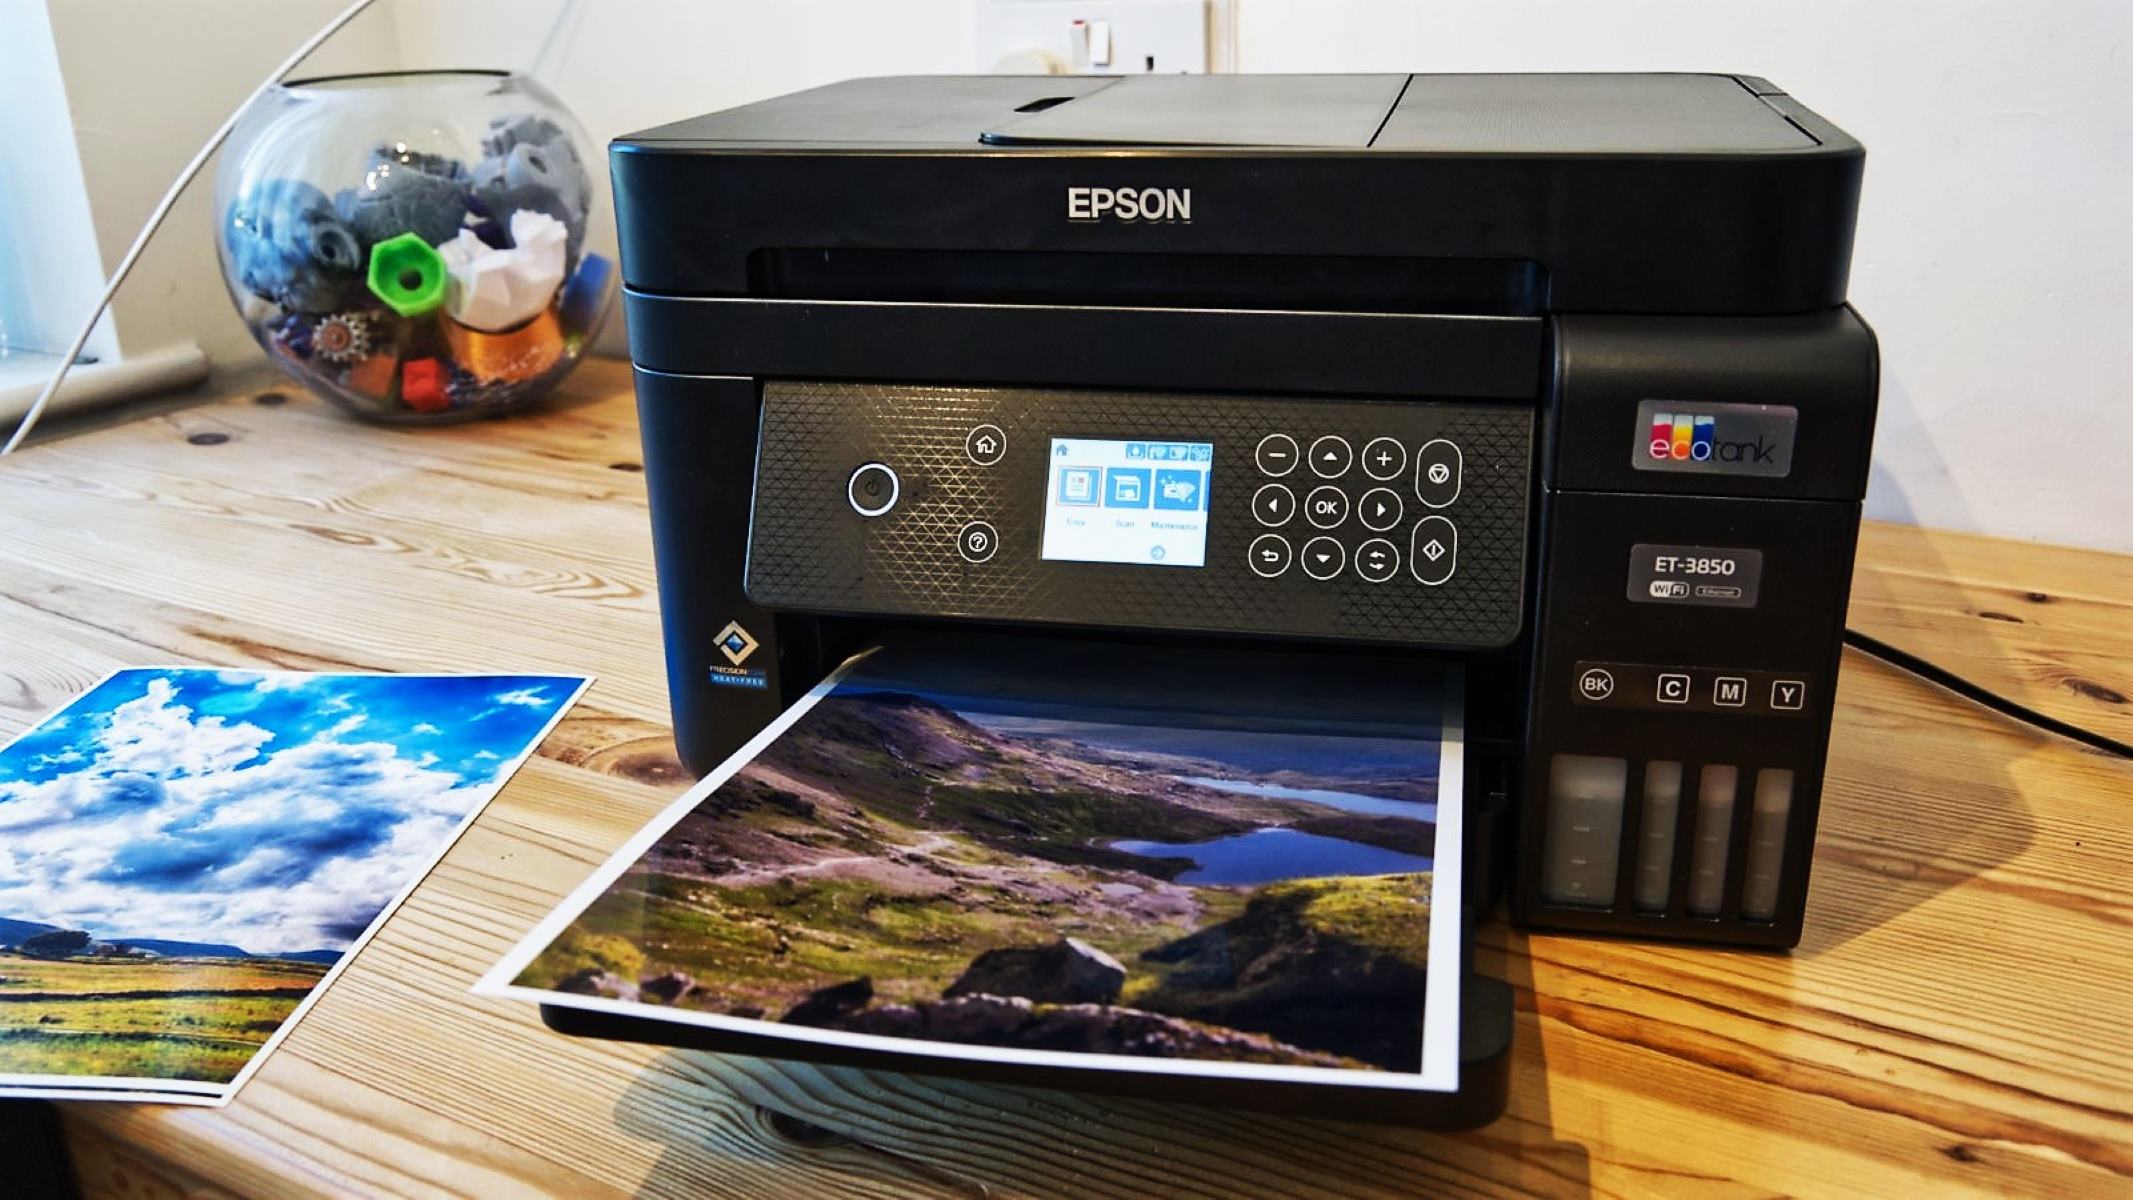 How To Connect IPad To Epson Printer